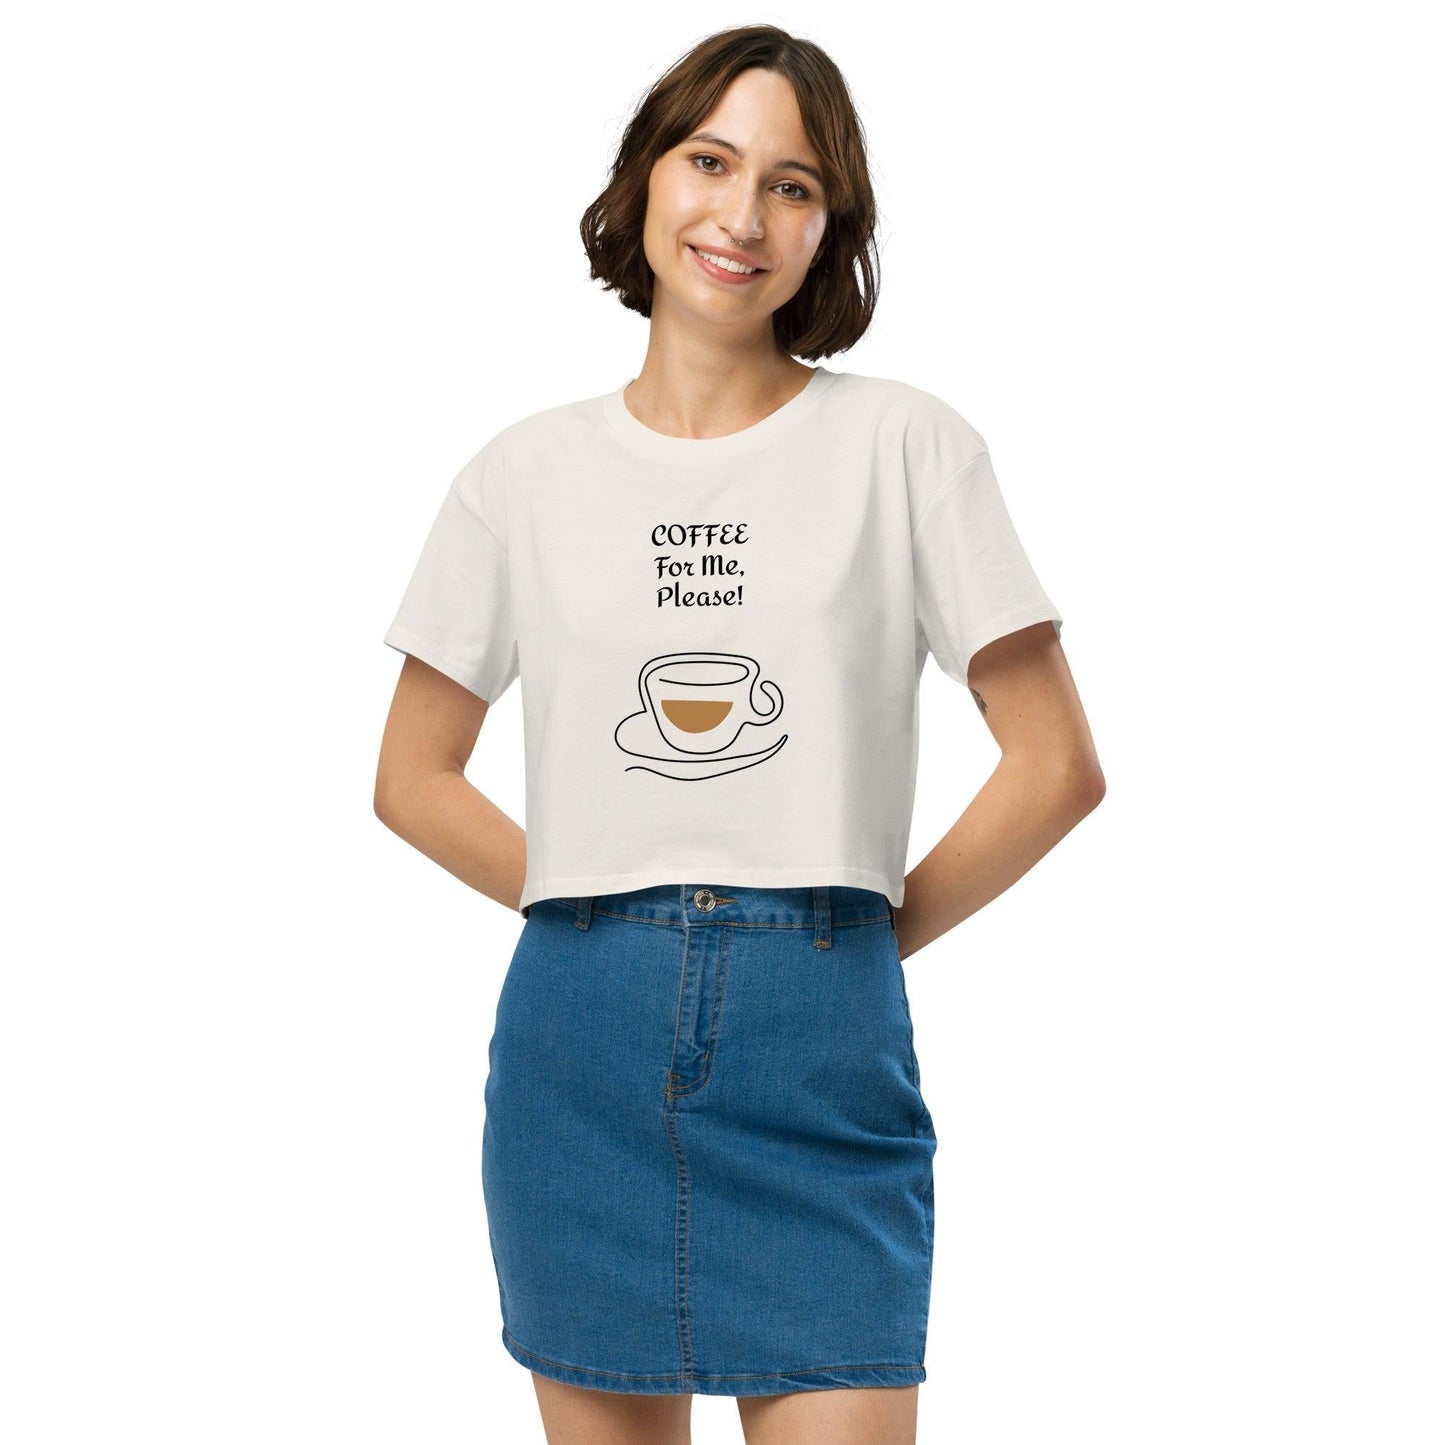 COFFEE For ME, Please! w/ a Cup and Saucer Women’s crop top - Lizard Vigilante